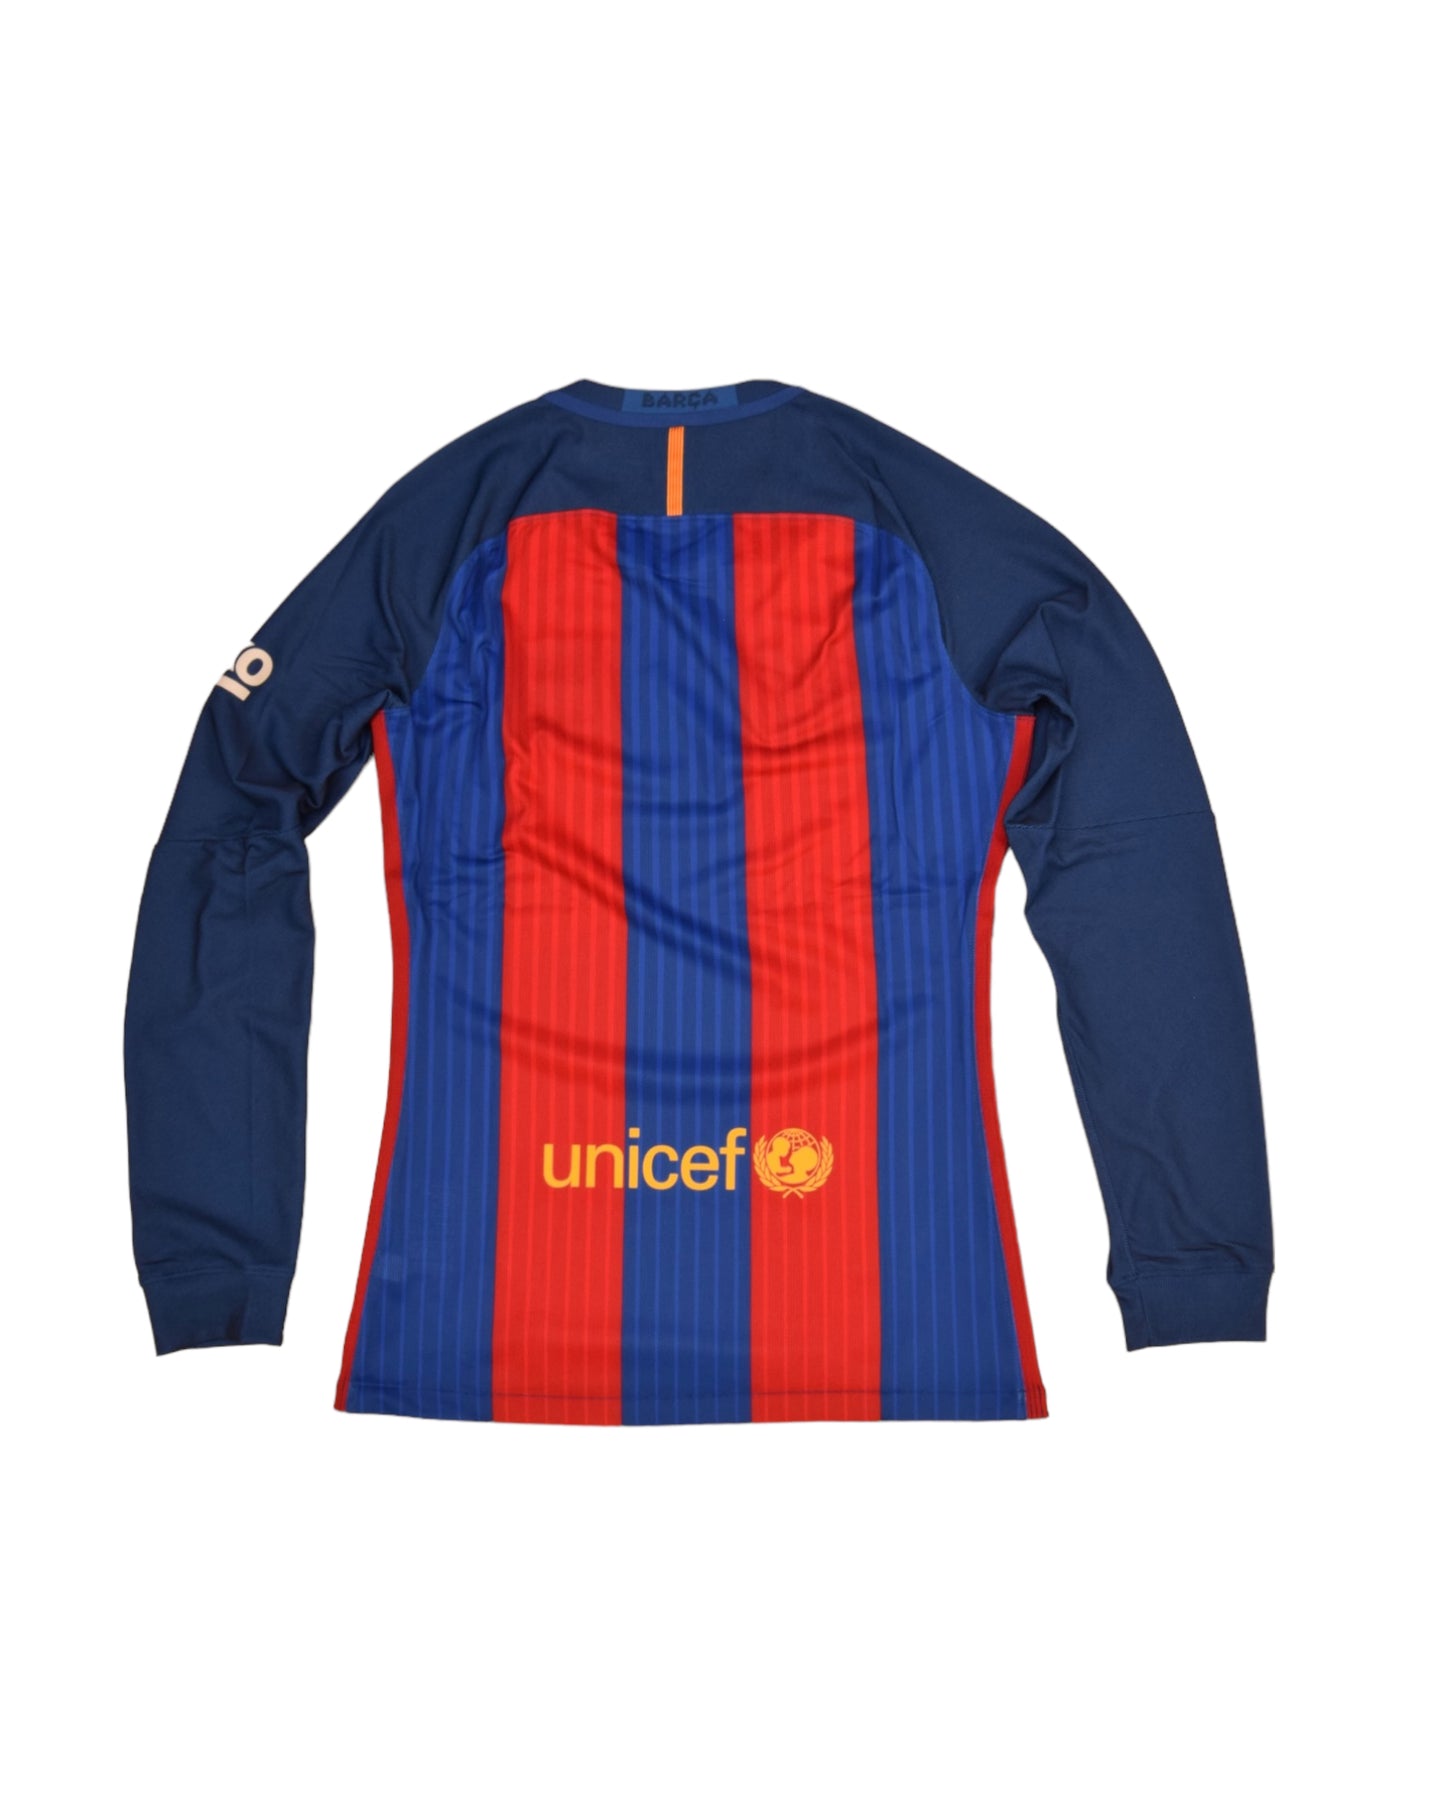 Barcelona Nike Aeroswift 2016 - 2017 Player Issue Home Football Shirt Size M Red Blue Long Sleeves New BNWT Deadstock Beko Unicef